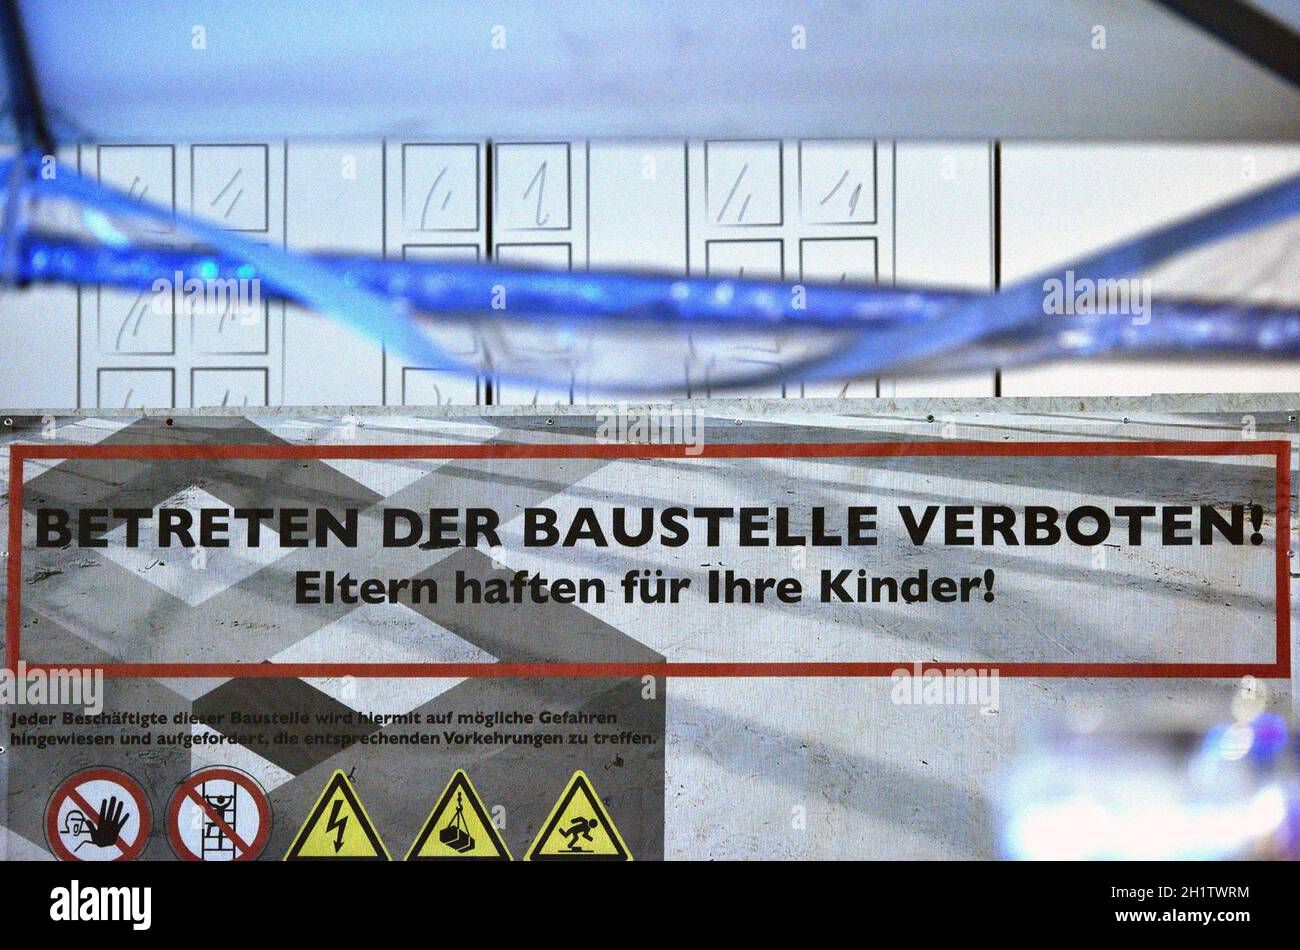 Verboten Schild High Resolution Stock Photography and Images - Alamy